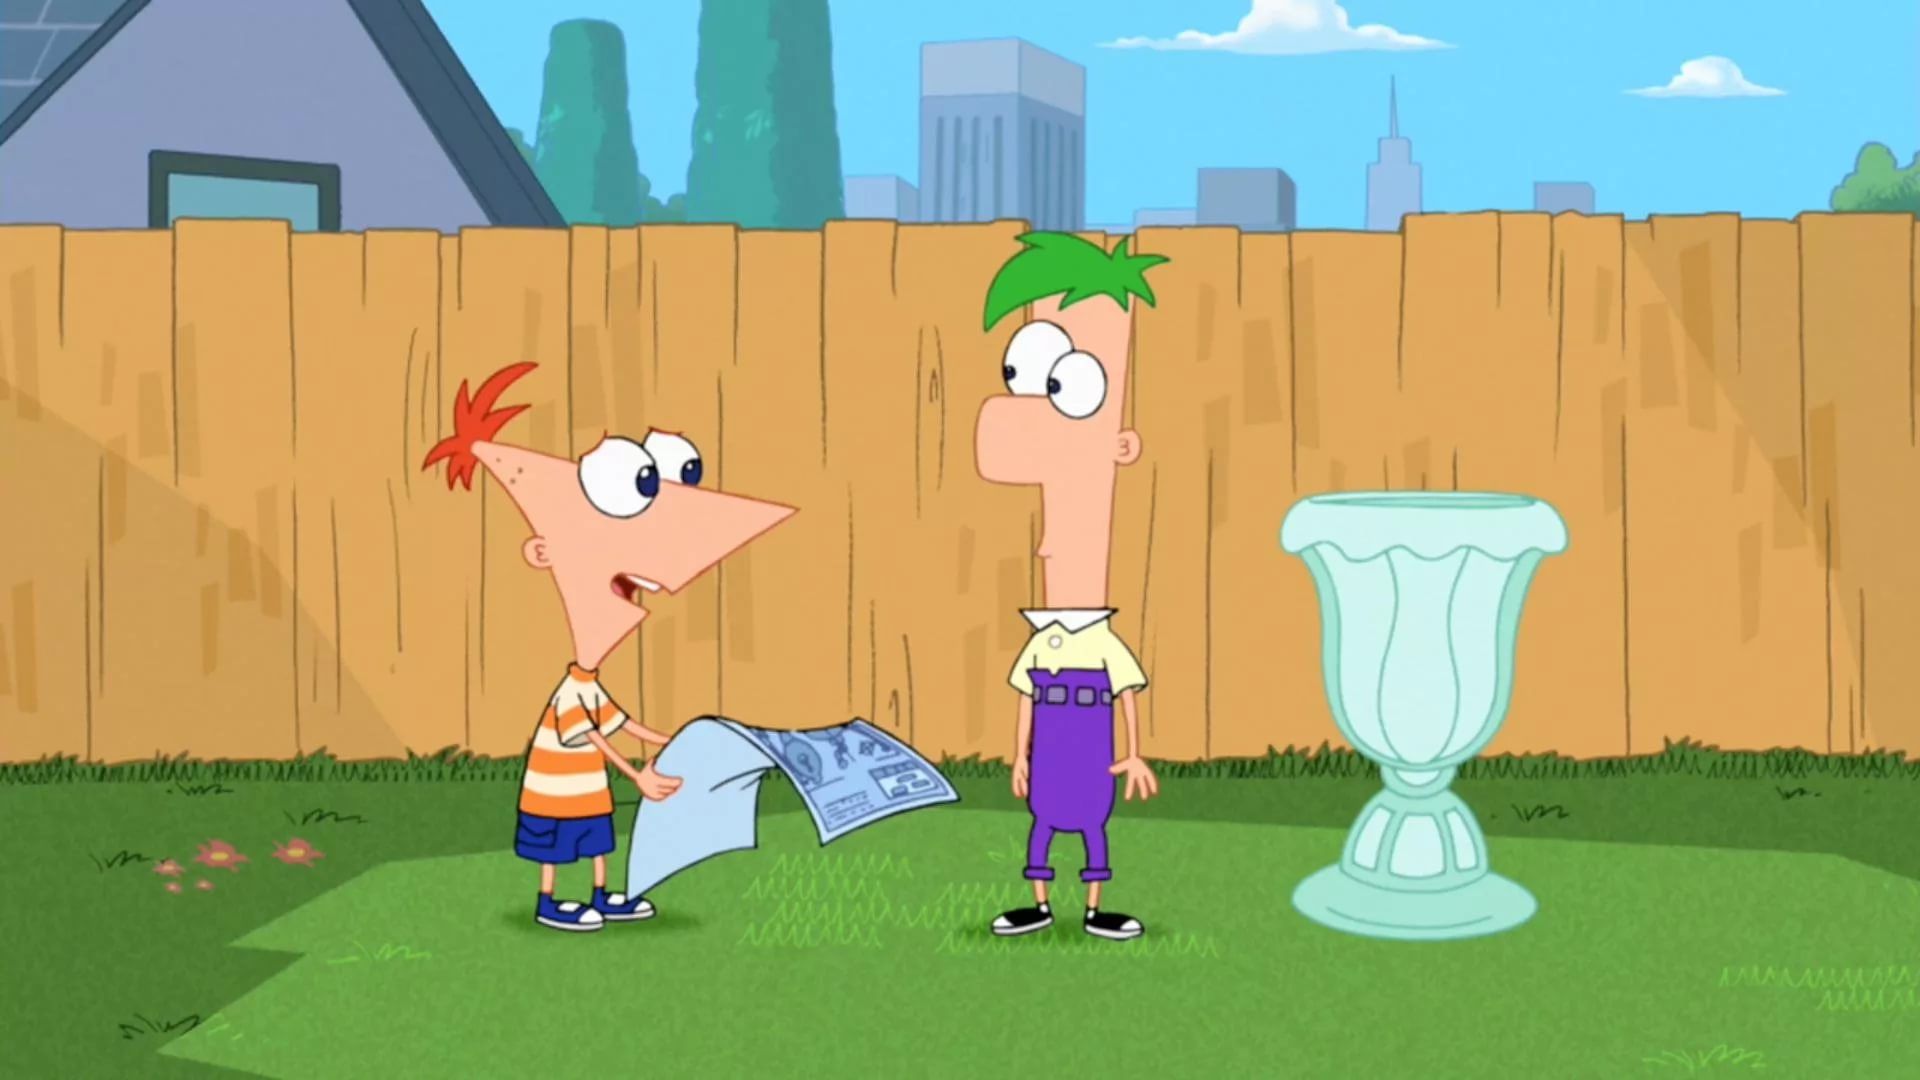 Phineas And Ferb Wikia desktop wallpaper